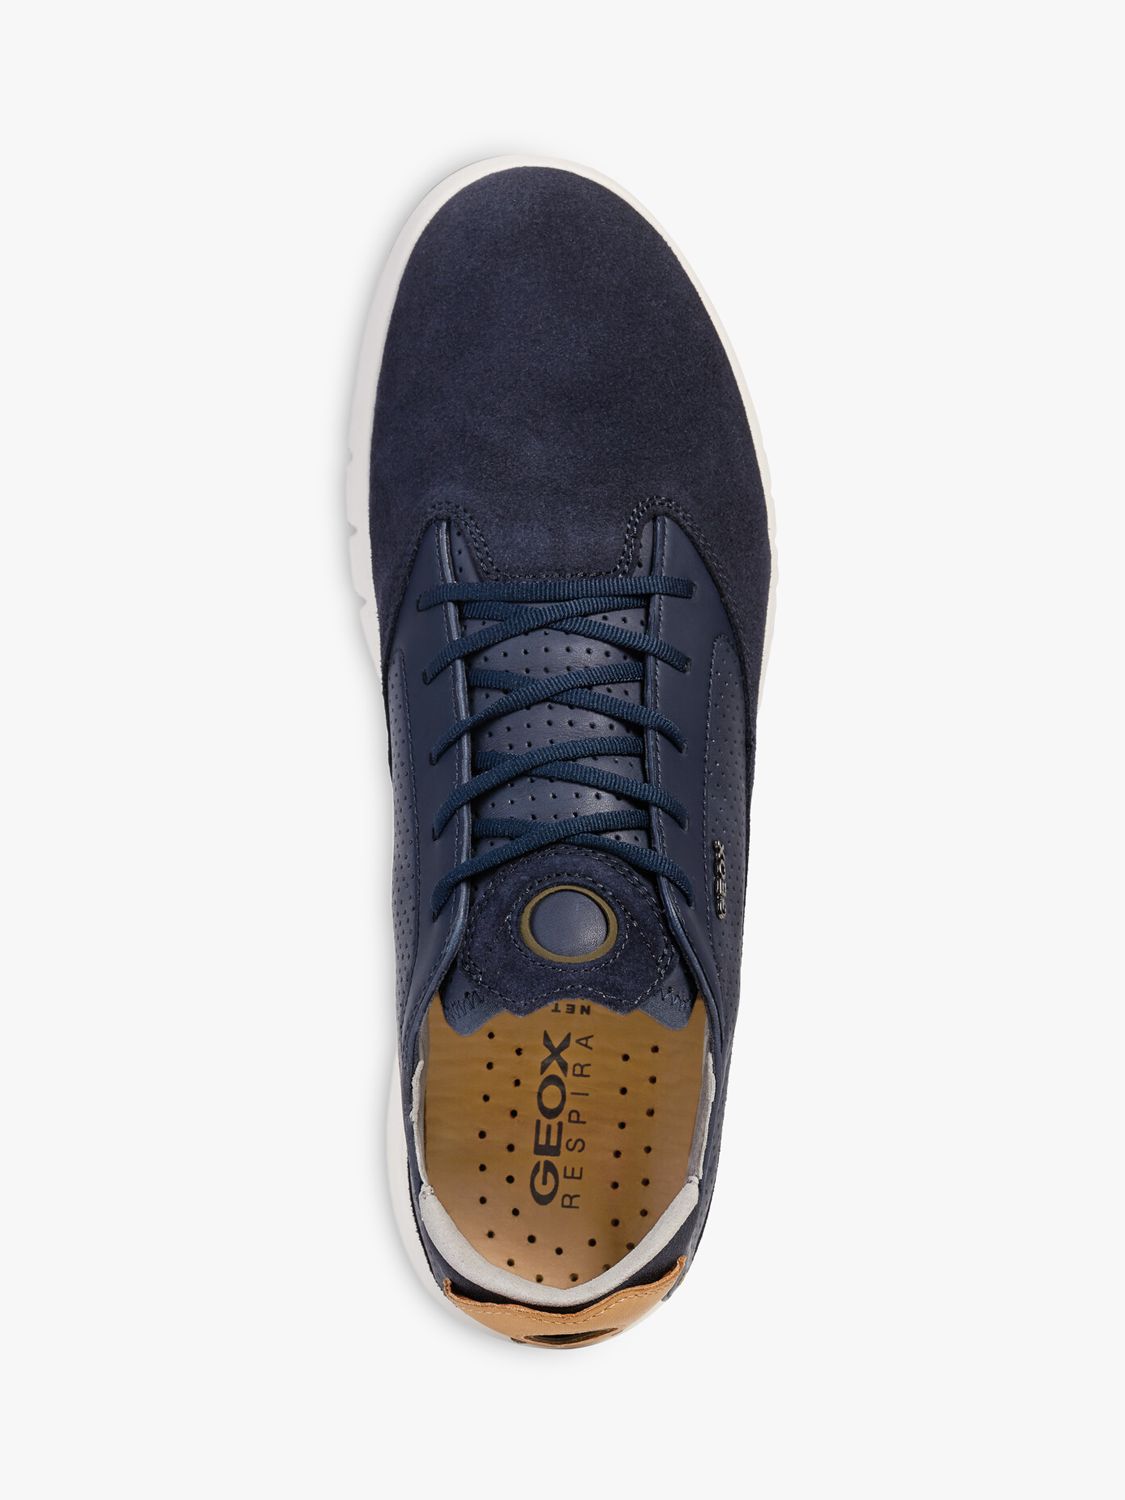 Buy Geox Aerantis Leather Trainers, Blue Online at johnlewis.com